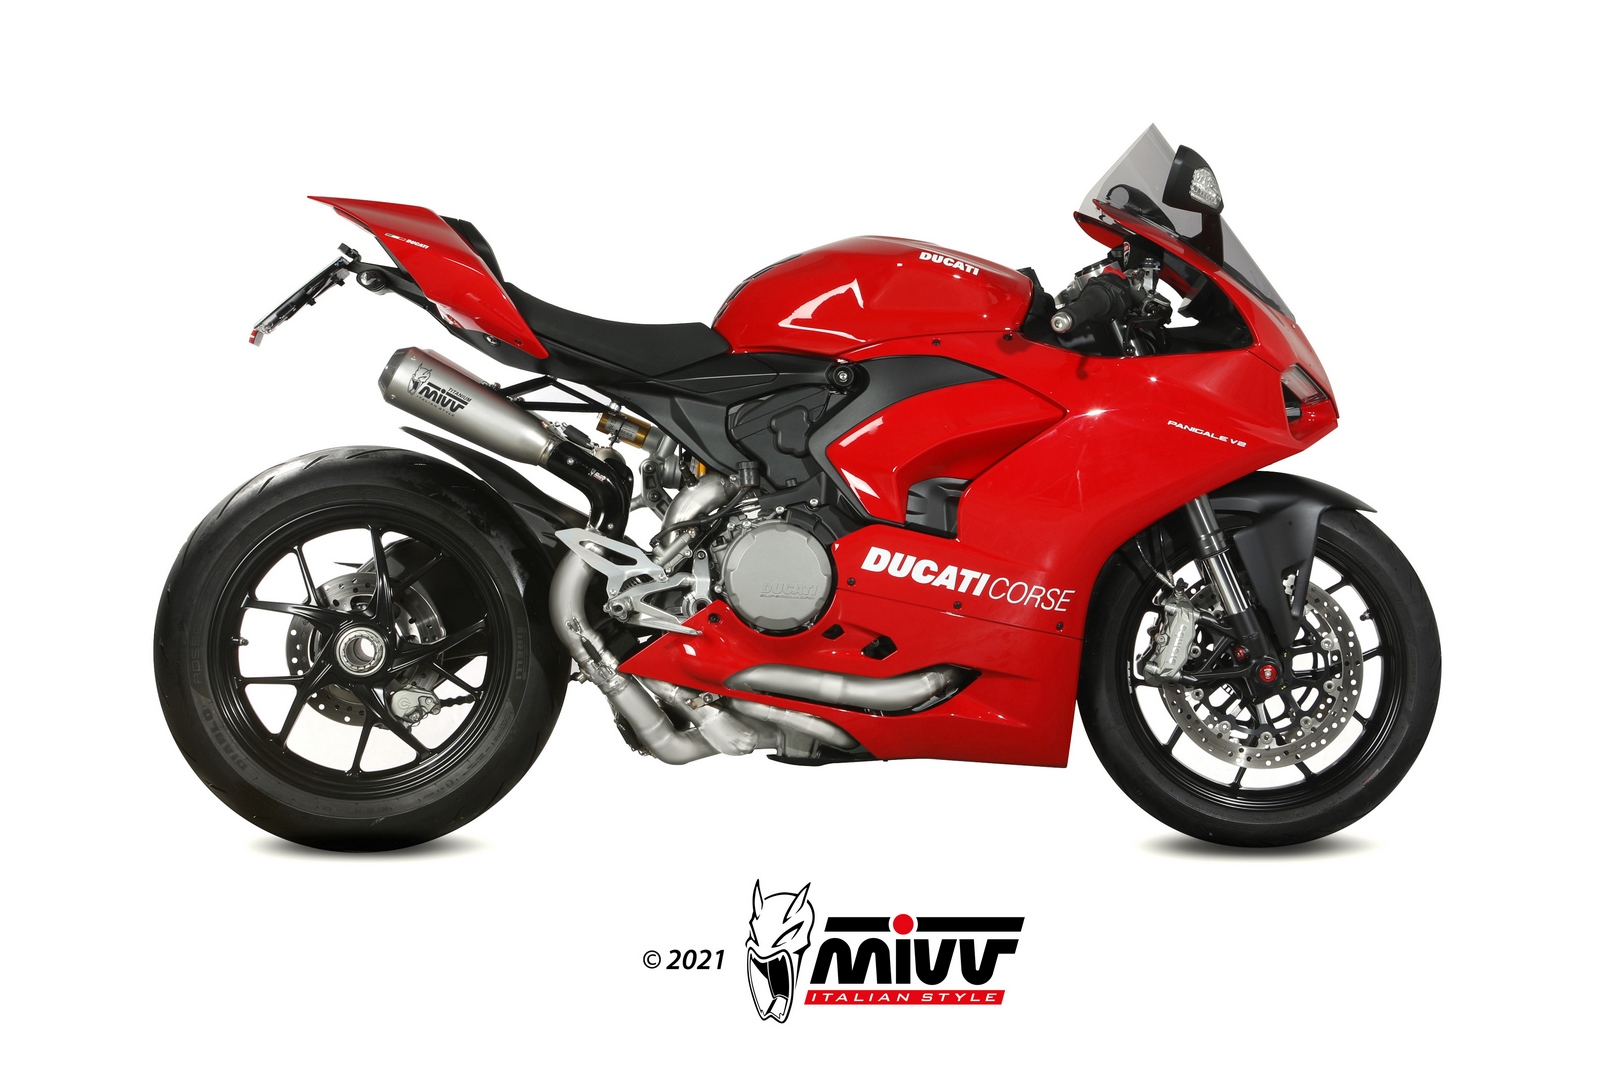 MIVV Full System 2x2, X-M1 Titan, Alto/High up Exhaust For Ducati Panigale V2 2020-2021